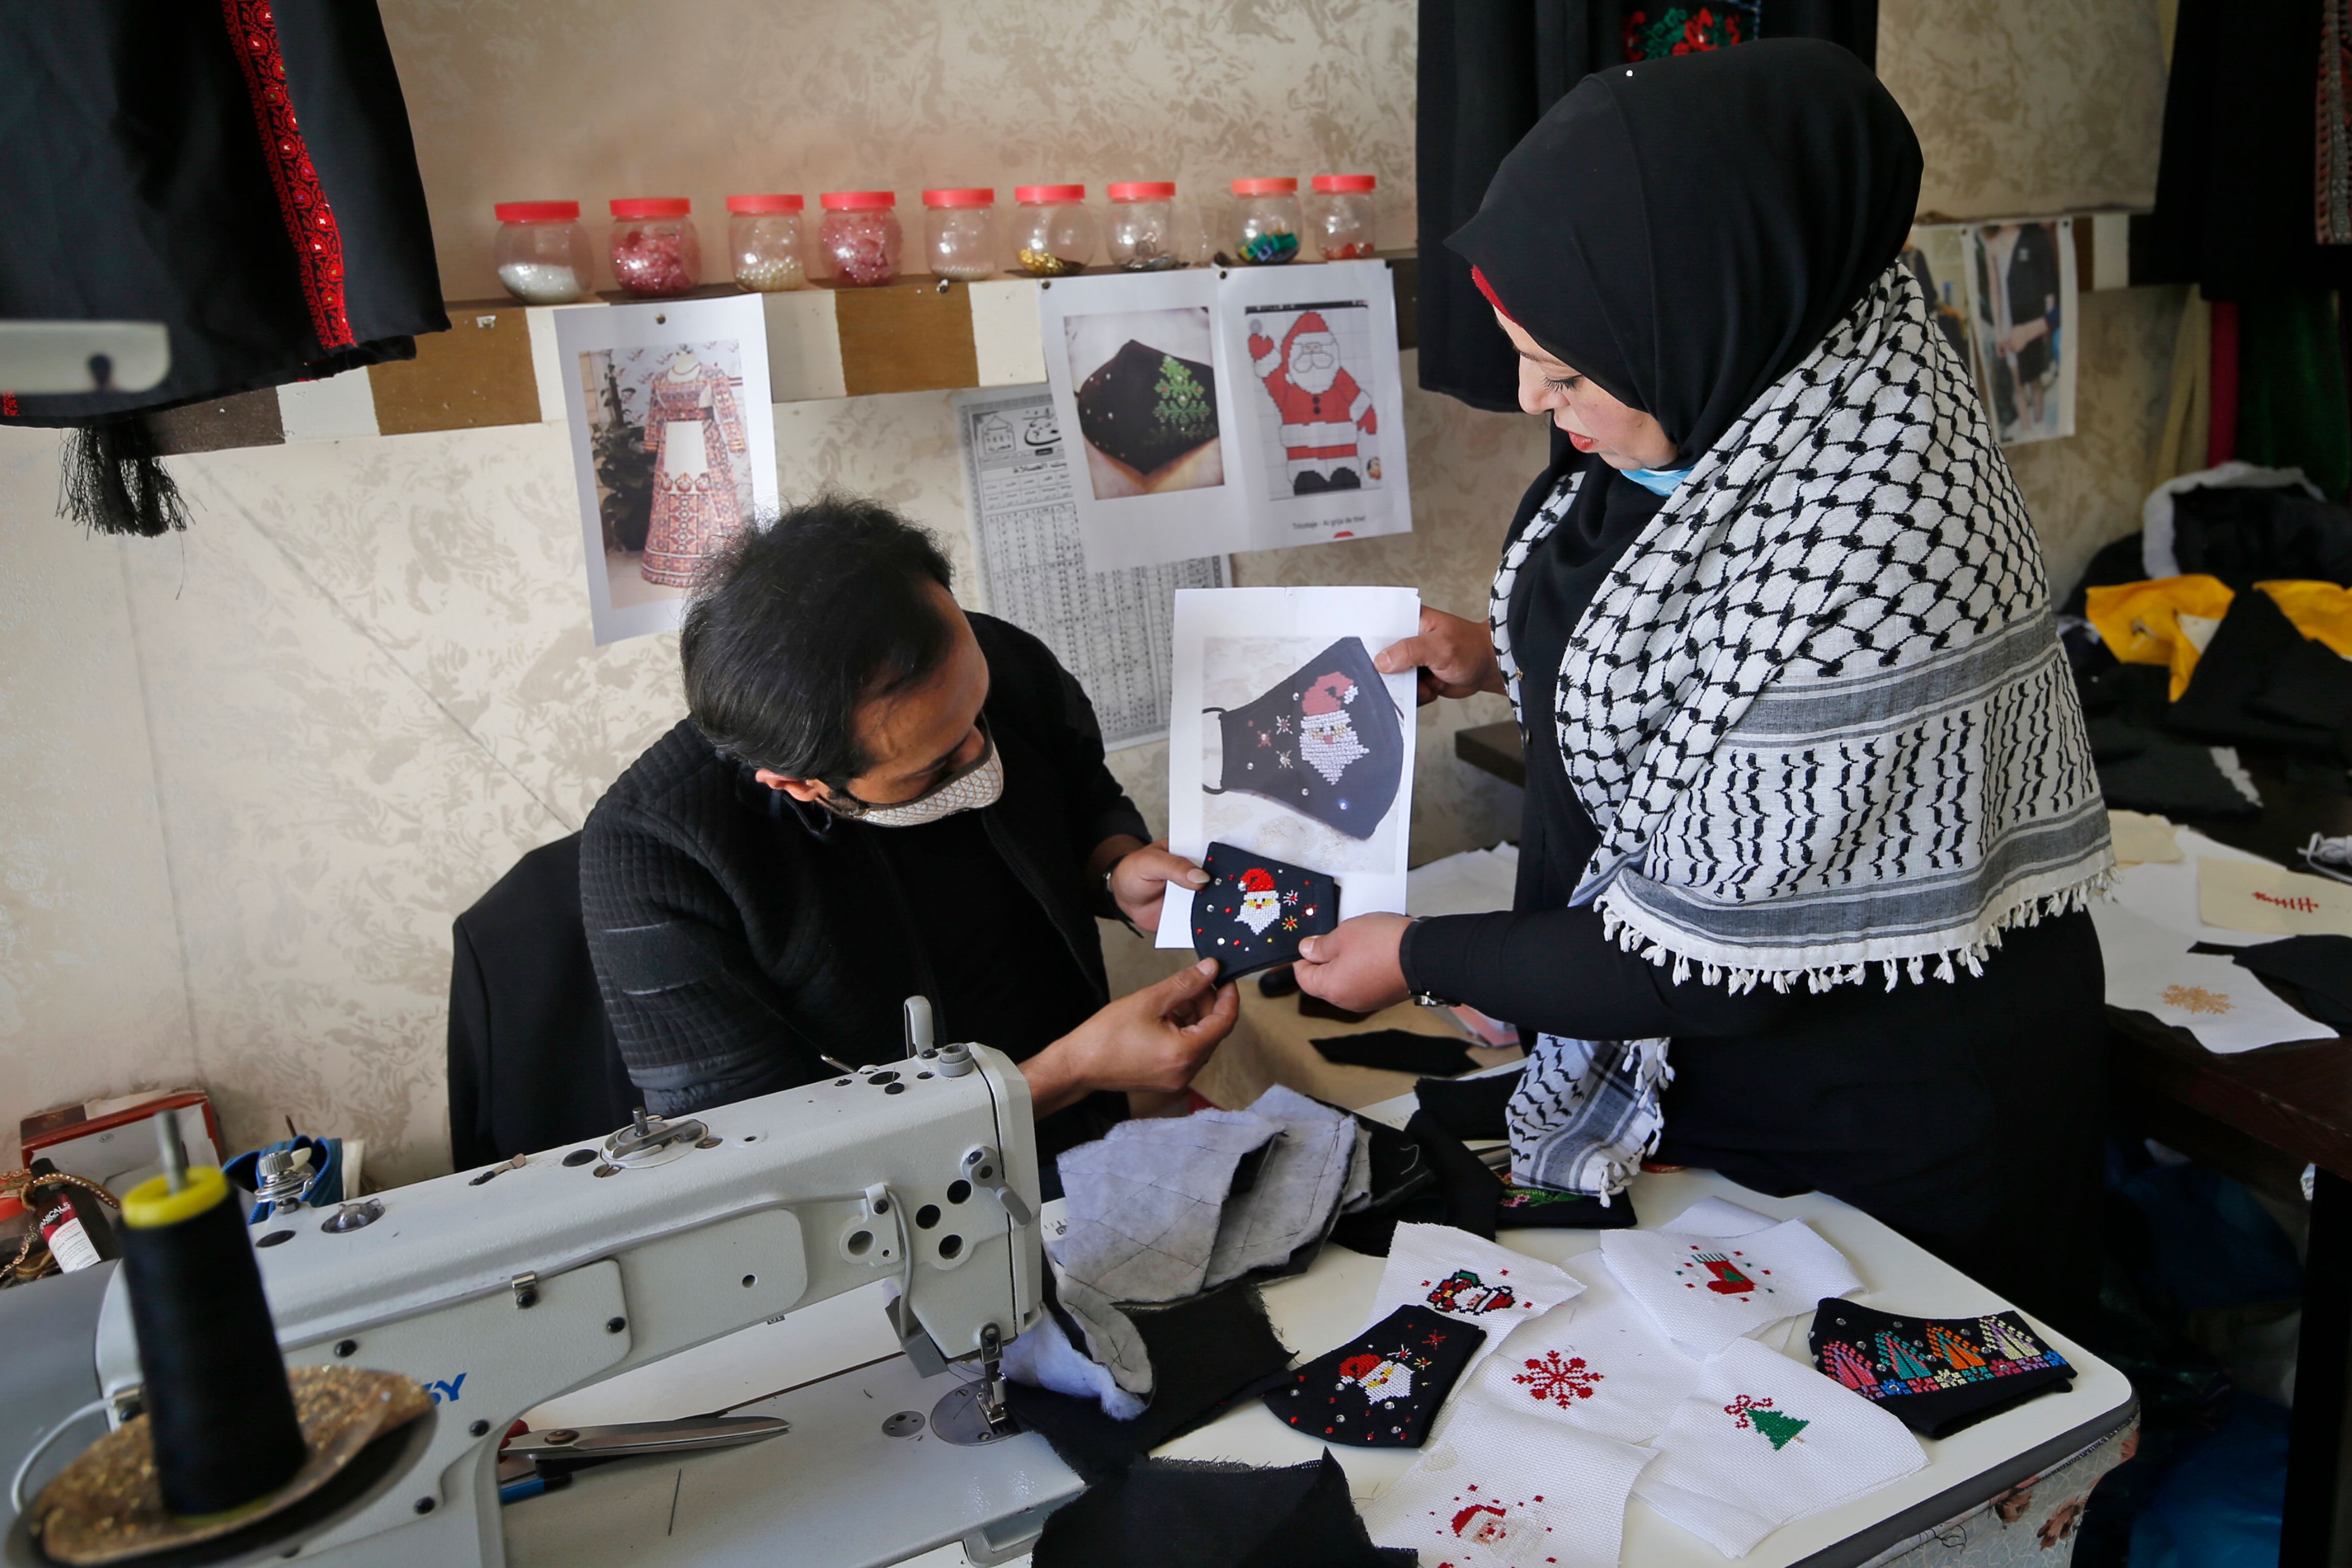 Owner of the workshop Suhad Saidam (right) discusses designs (photo: Mohammed Abed/AFP/Getty Images)